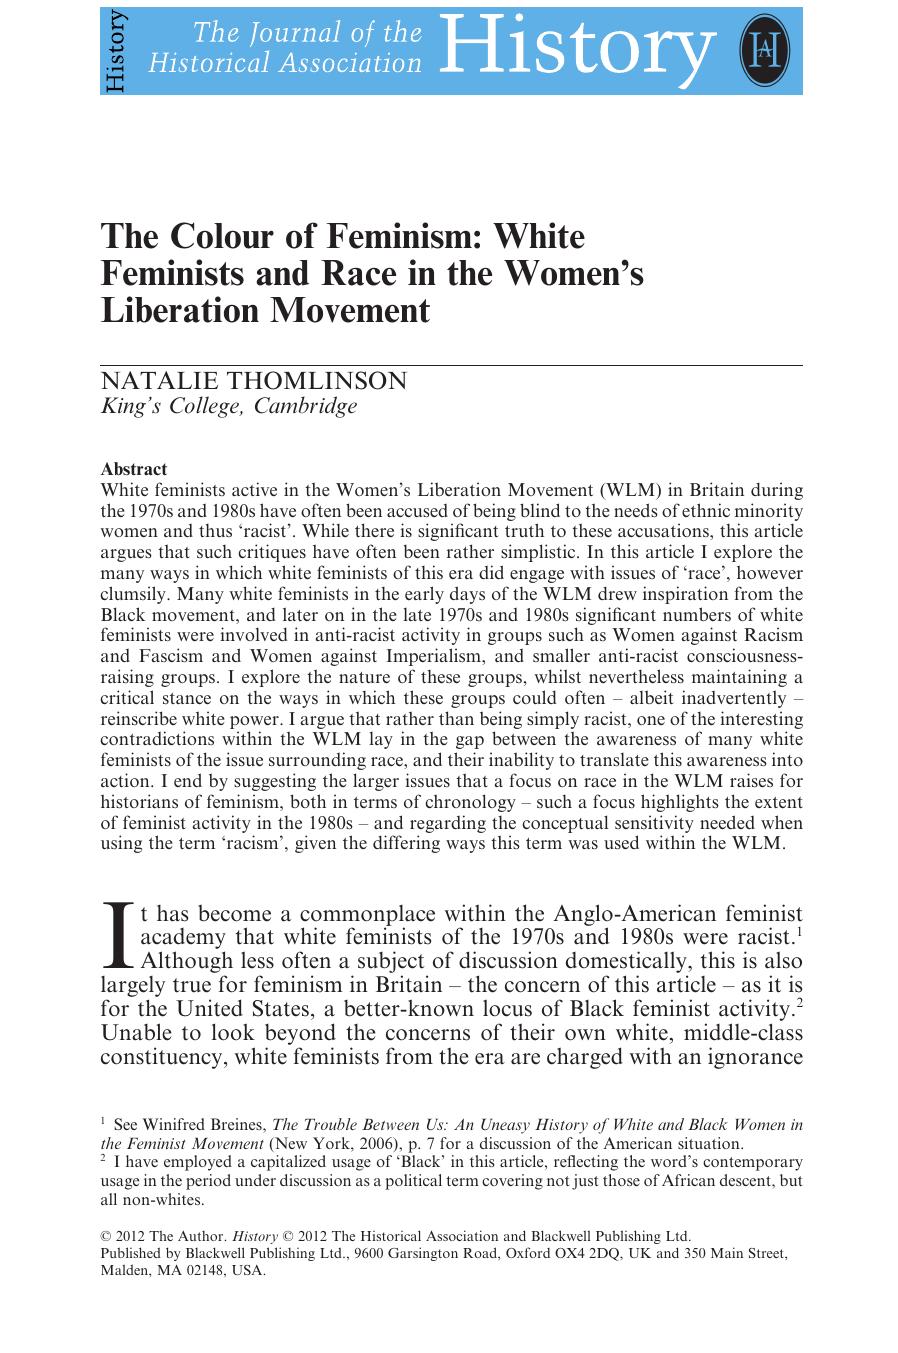 The Colour of Feminism: White Feminists and Race in the Women's Liberation Movement